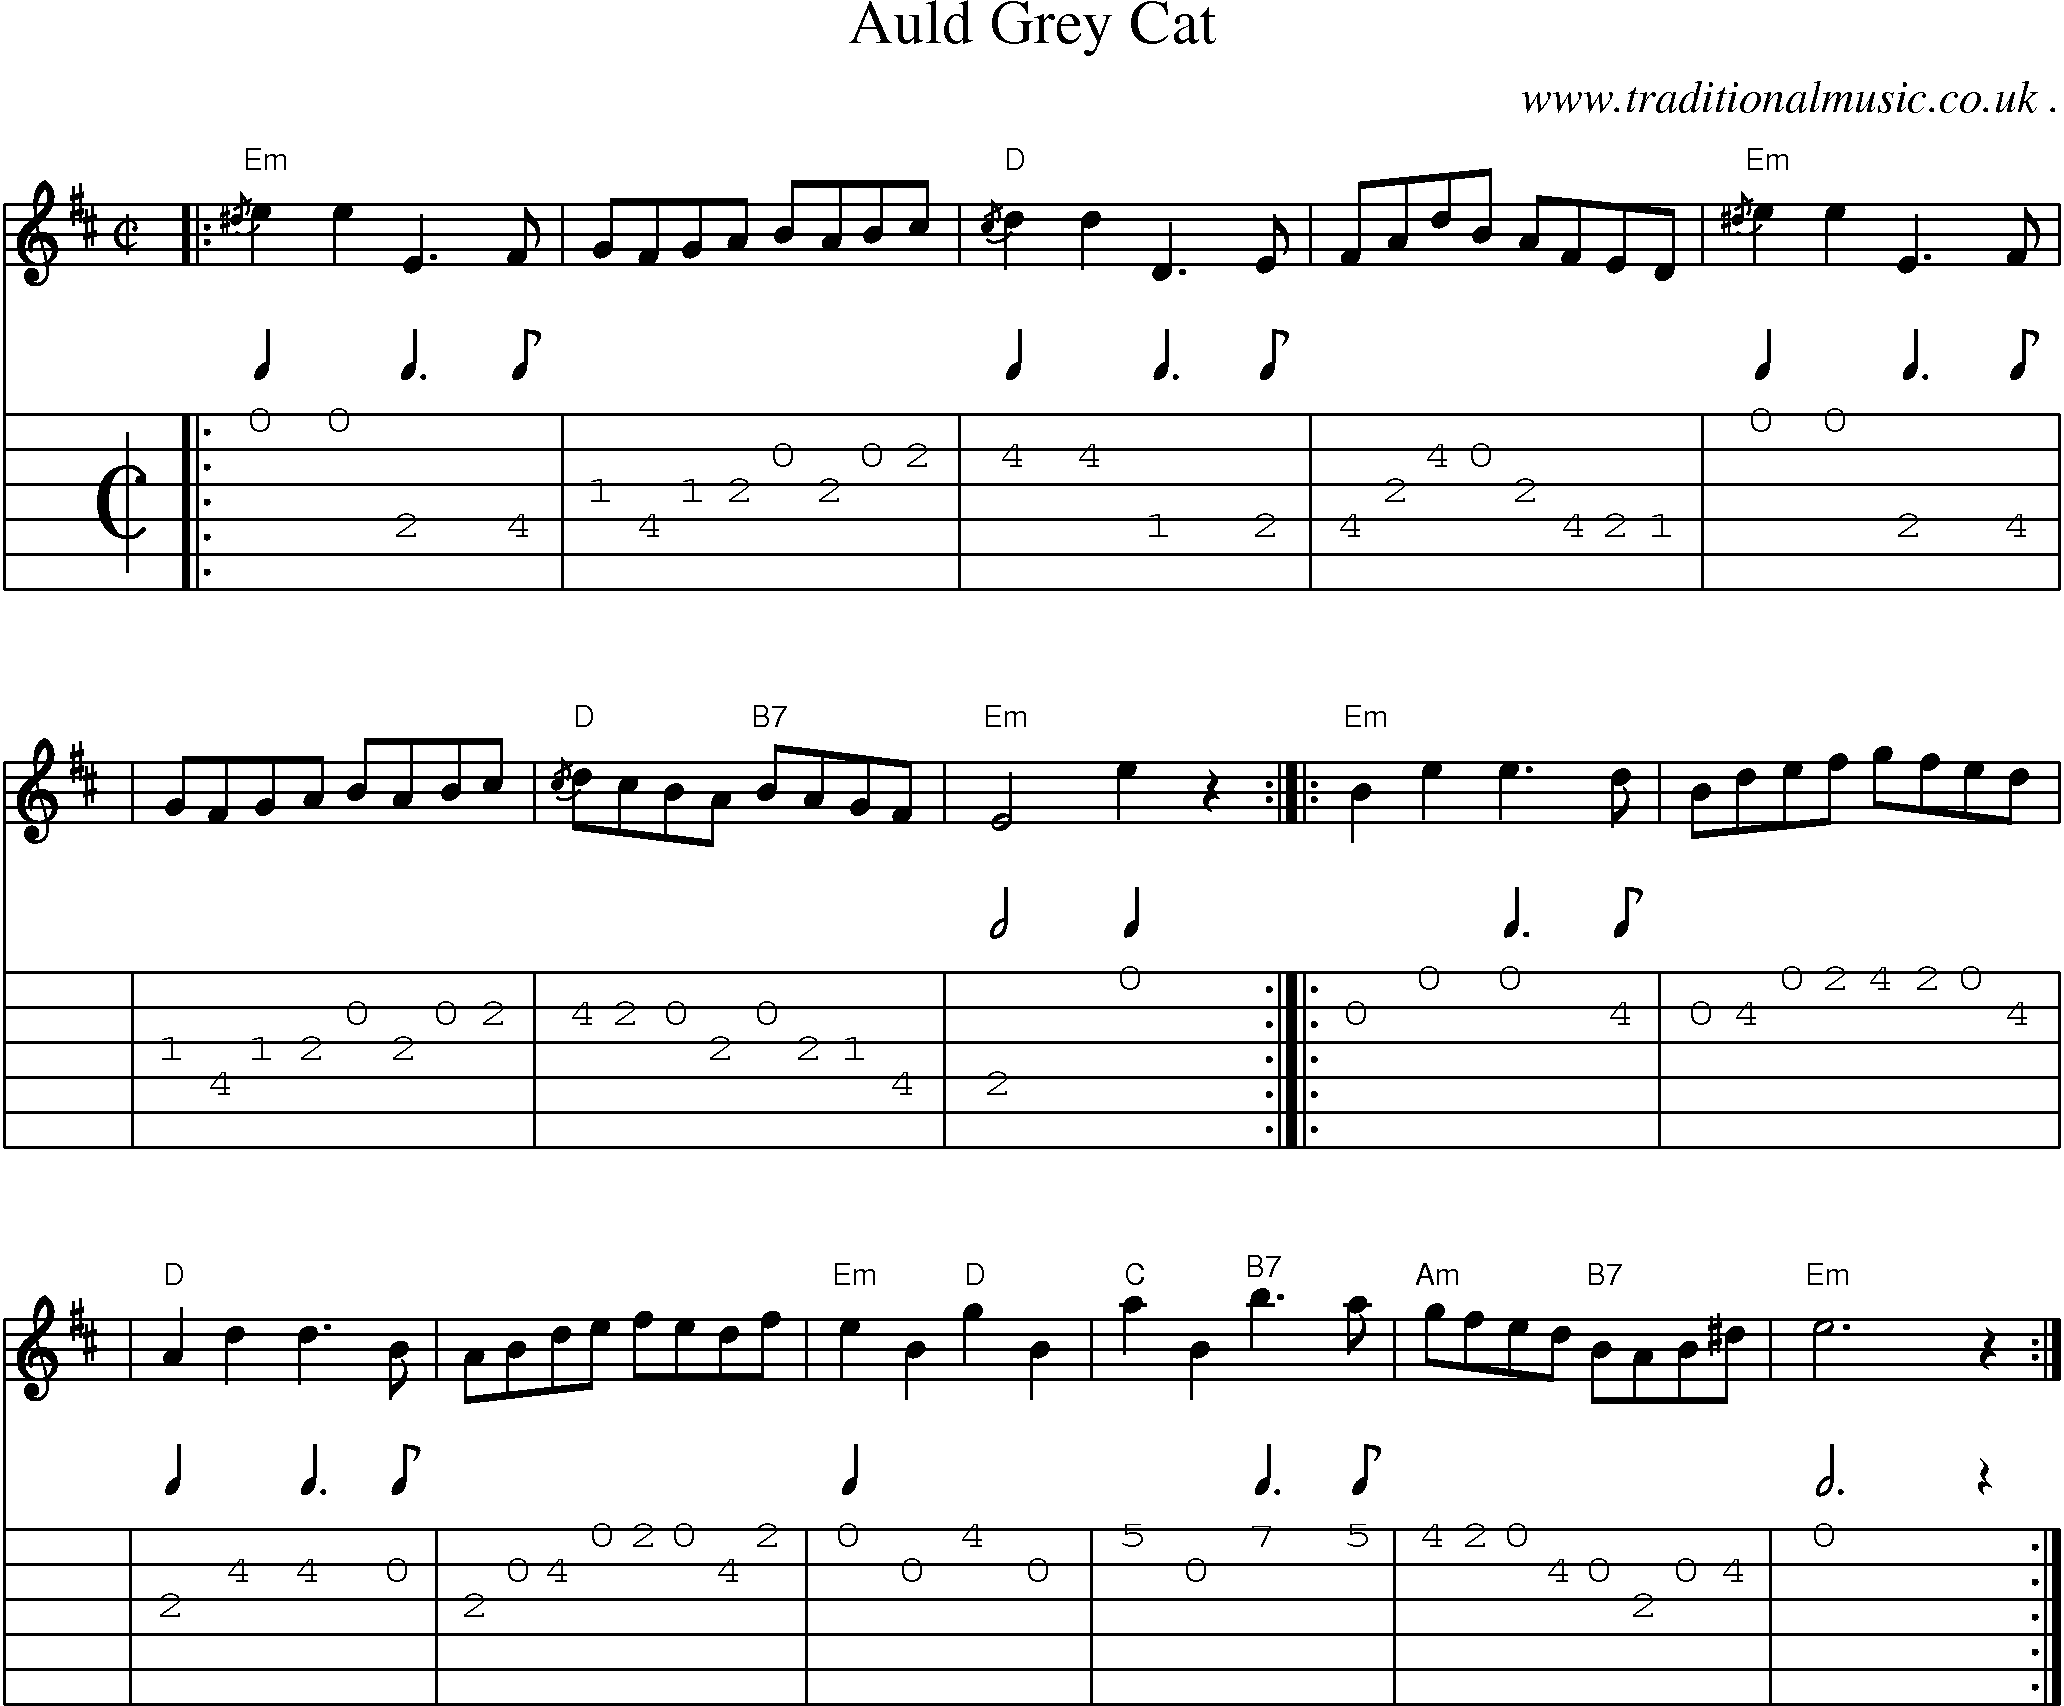 Sheet-music  score, Chords and Guitar Tabs for Auld Grey Cat